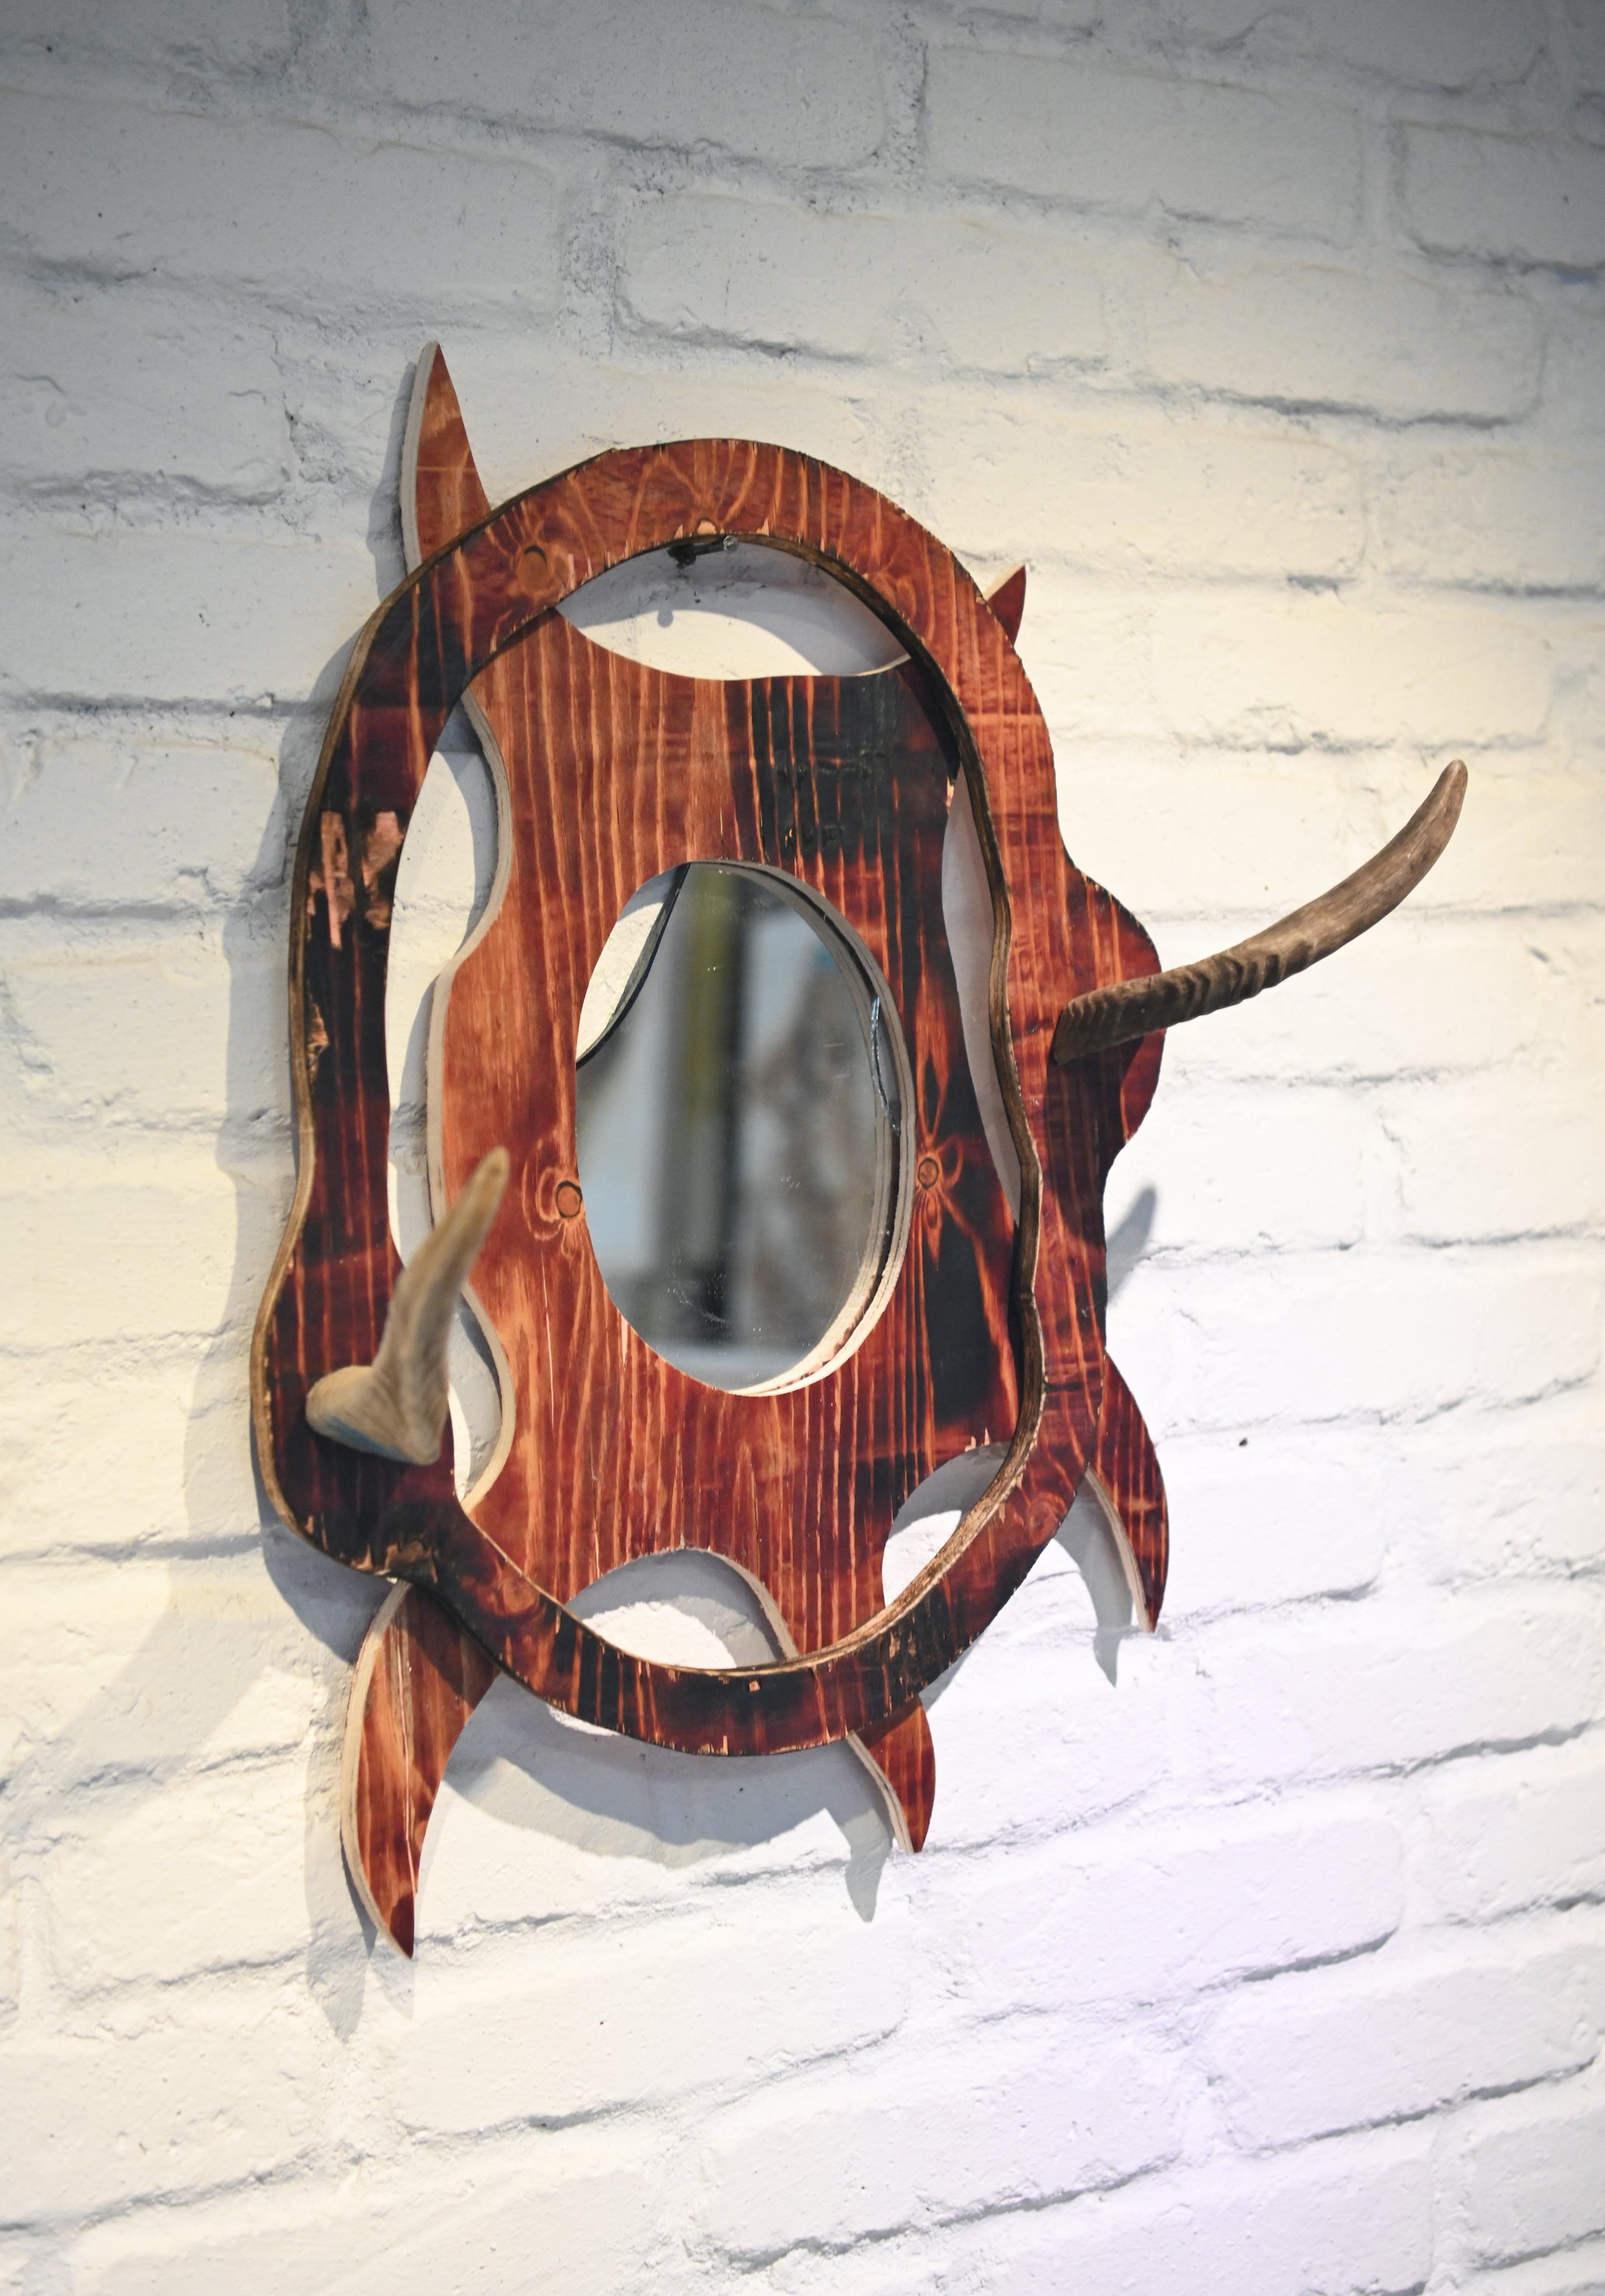 Objects In Mirror Closer Than They Appear -4, 65x50x20cm, plywood, mirror and goat horns, 2021.jpg.jpg